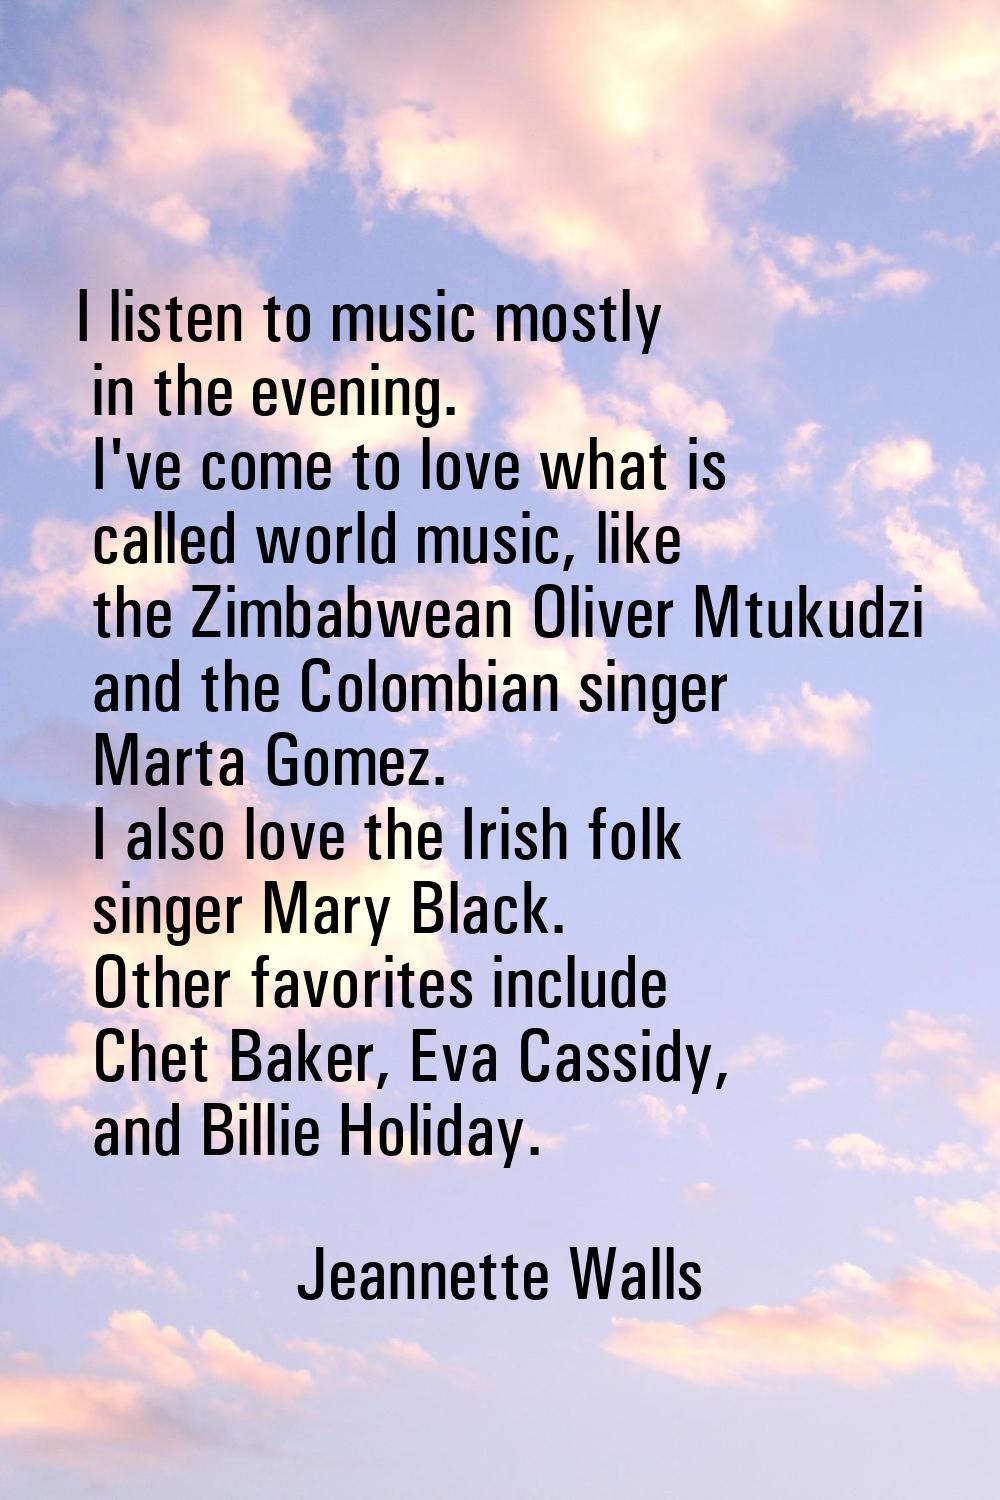 I listen to music mostly in the evening. I've come to love what is called world music, like the Zim